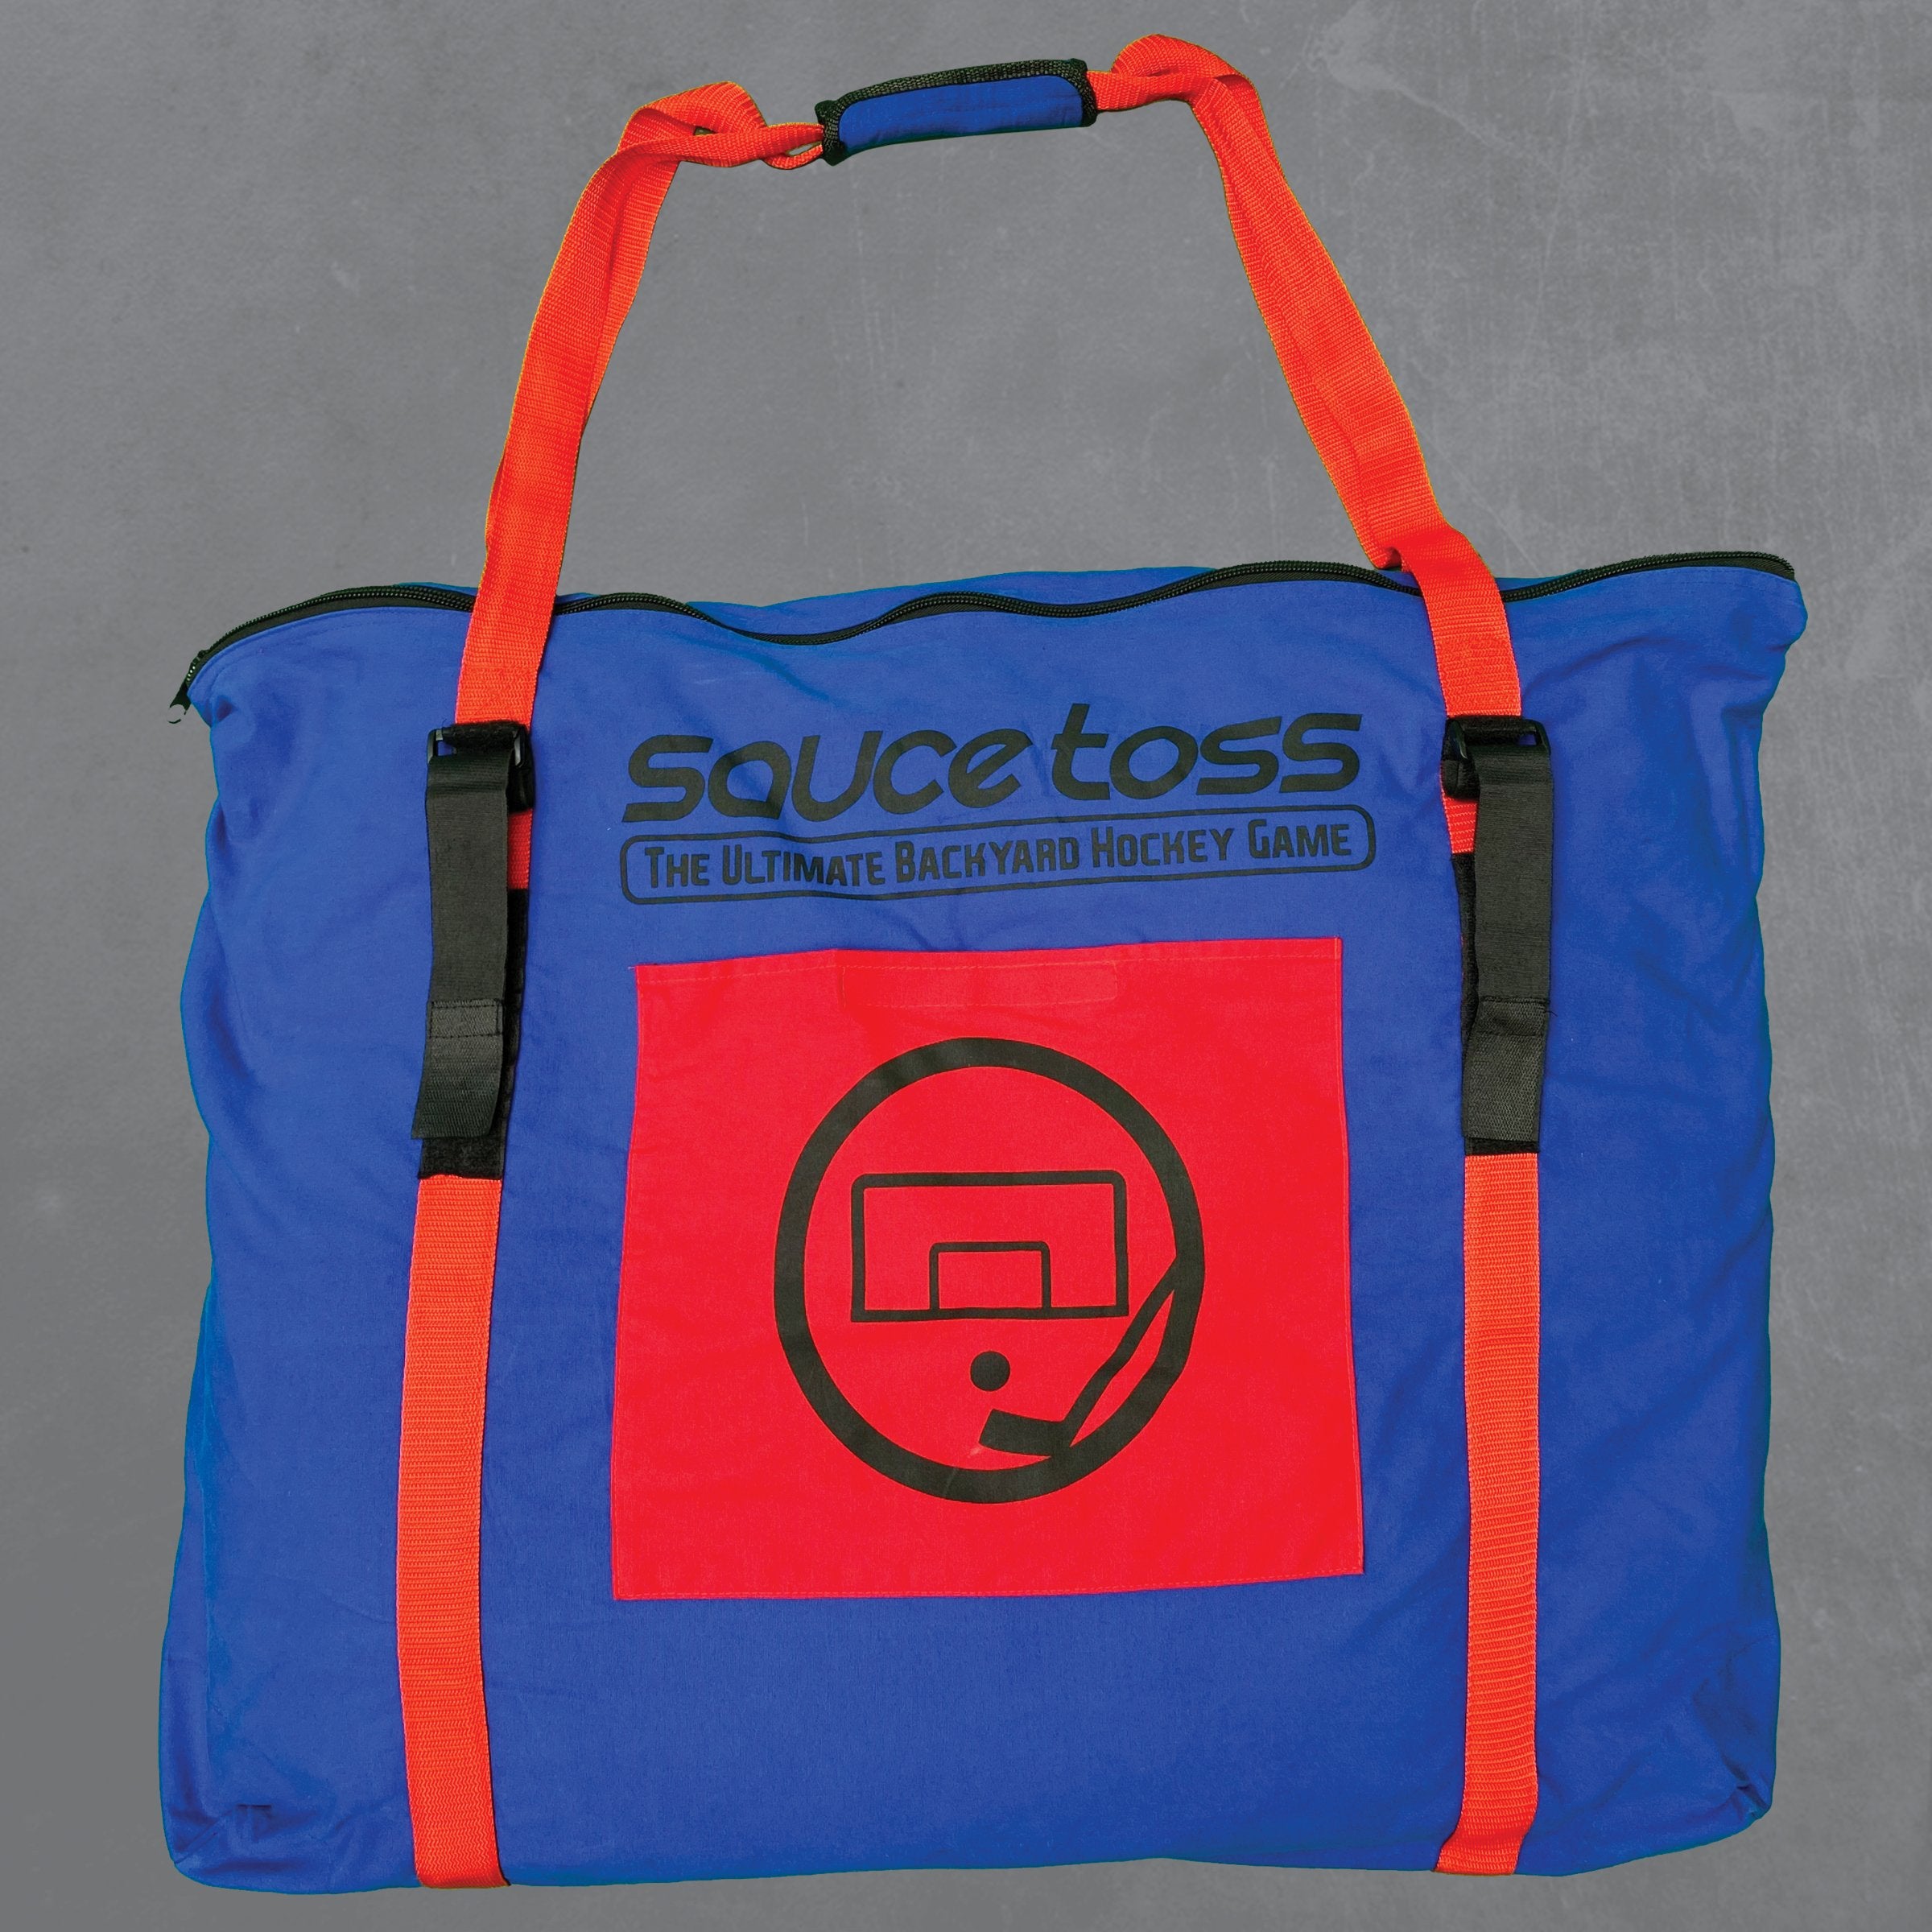 A Blue and Red Sauce Toss Travel Bag on a grey background